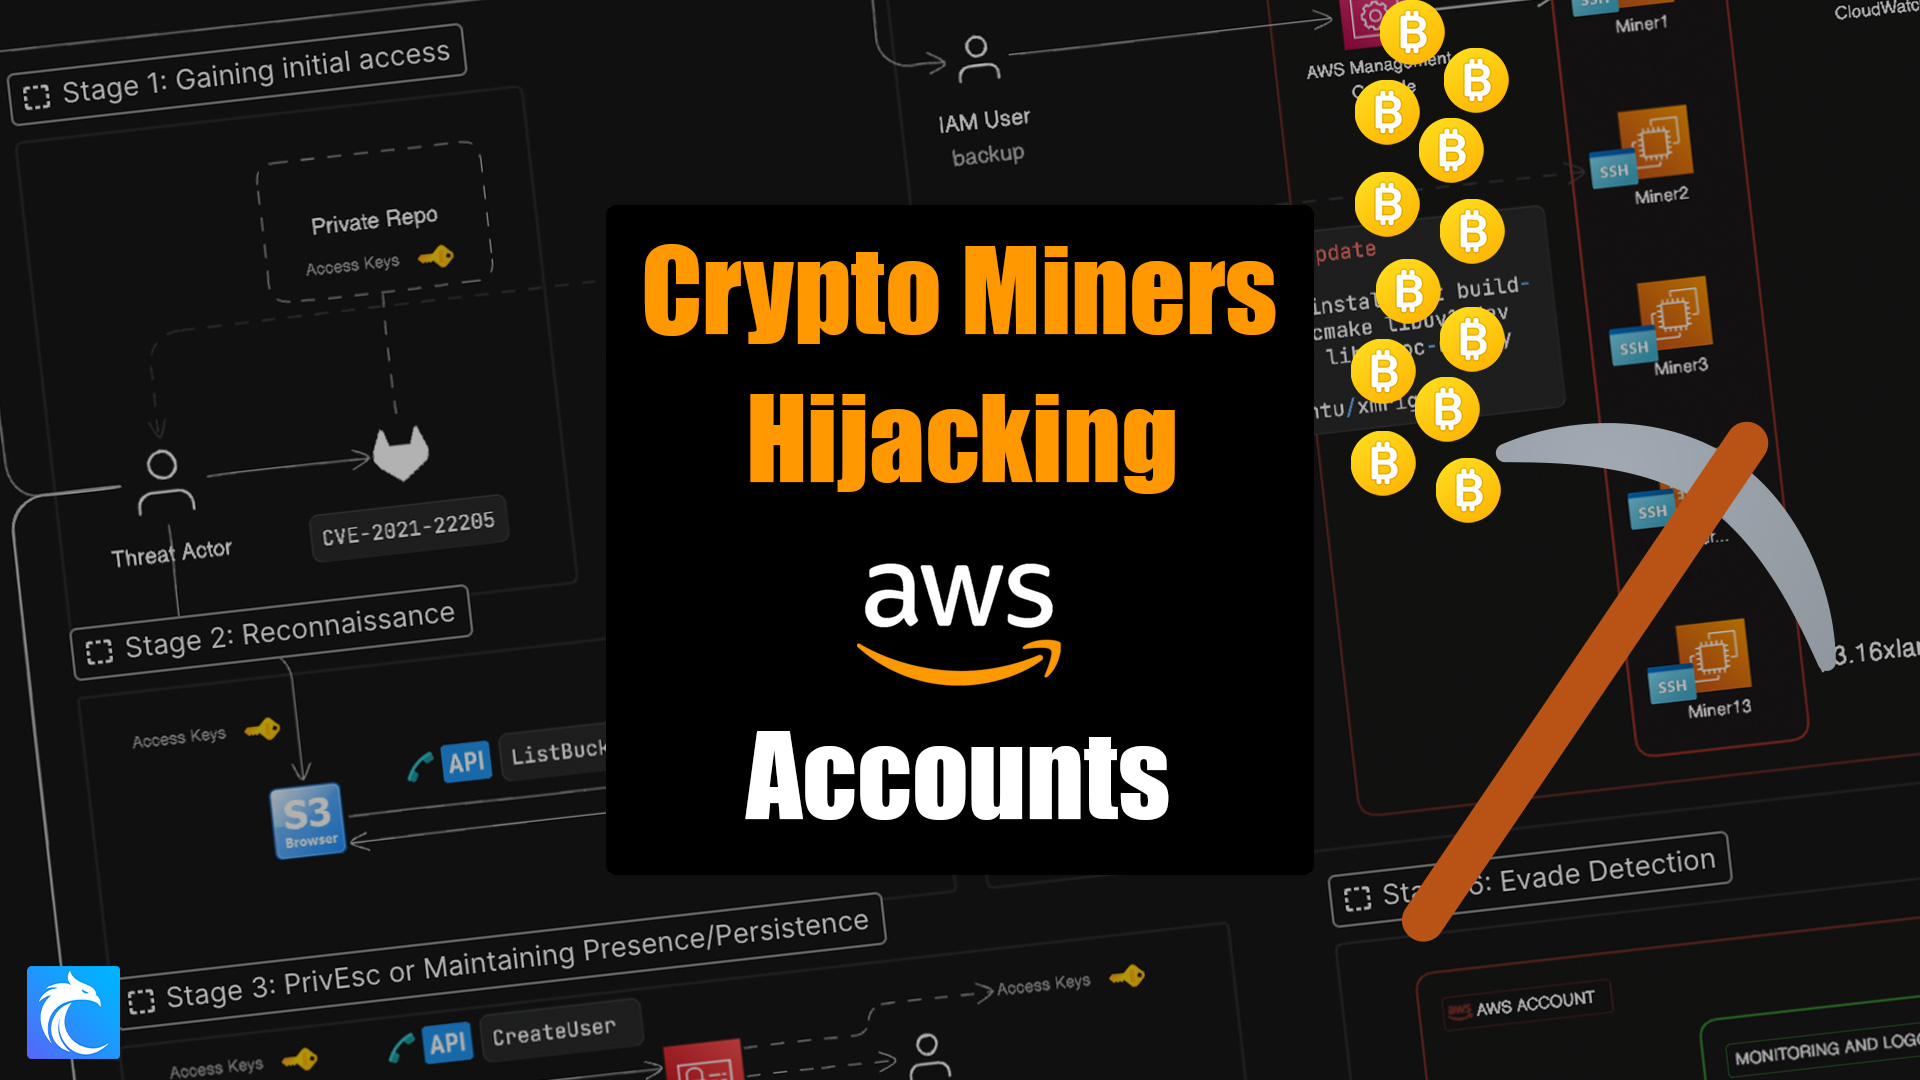 Troubleshoot the GuardDuty finding type CryptoCurrency:EC2 | AWS re:Post